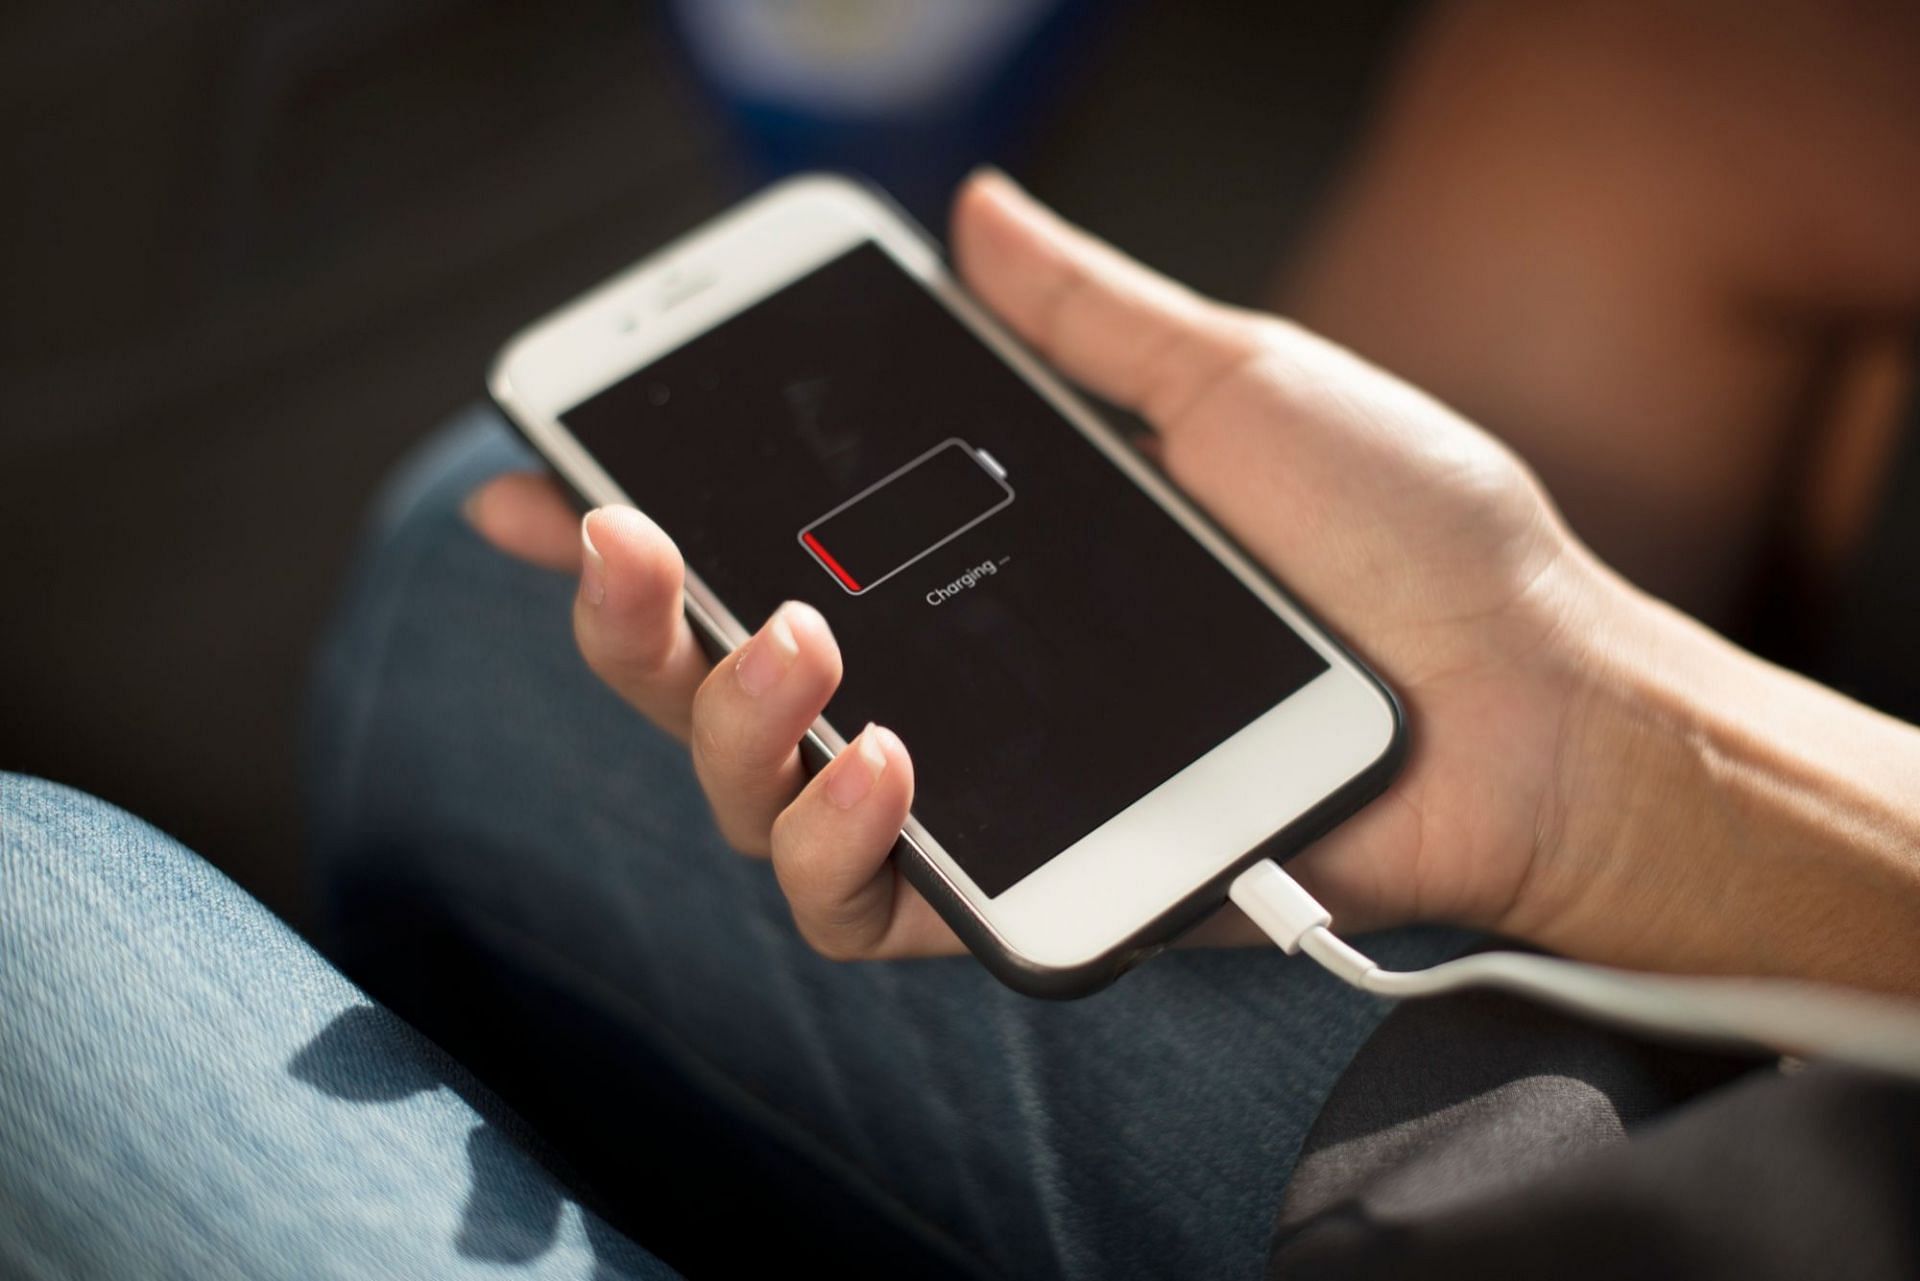 Is low battery anxiety real? (Image by rawpixel.com on Freepik)